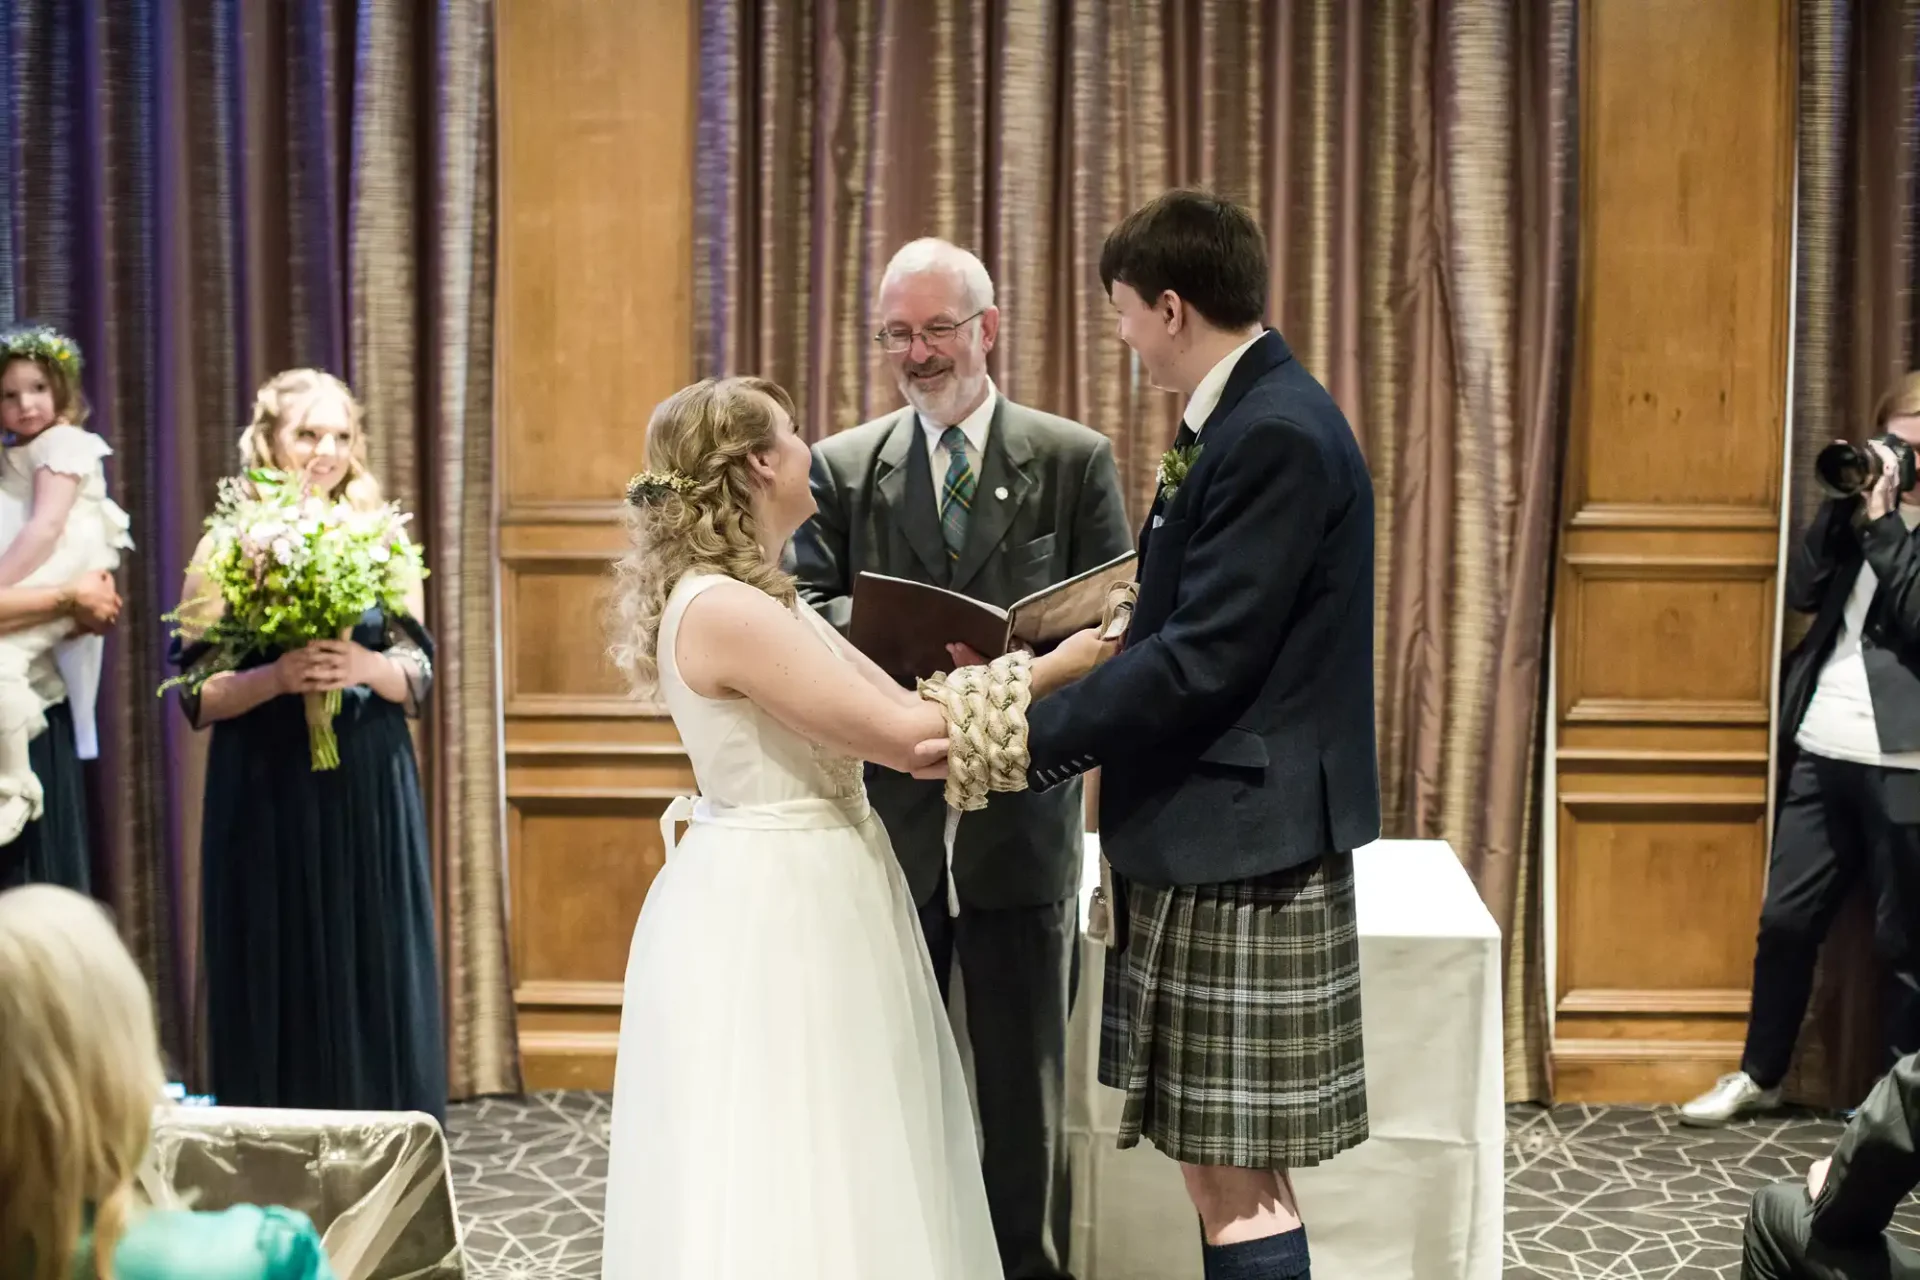 A bride in a white dress and a groom in a kilt exchanging vows at a wedding ceremony, with a minister overseeing and guests watching.